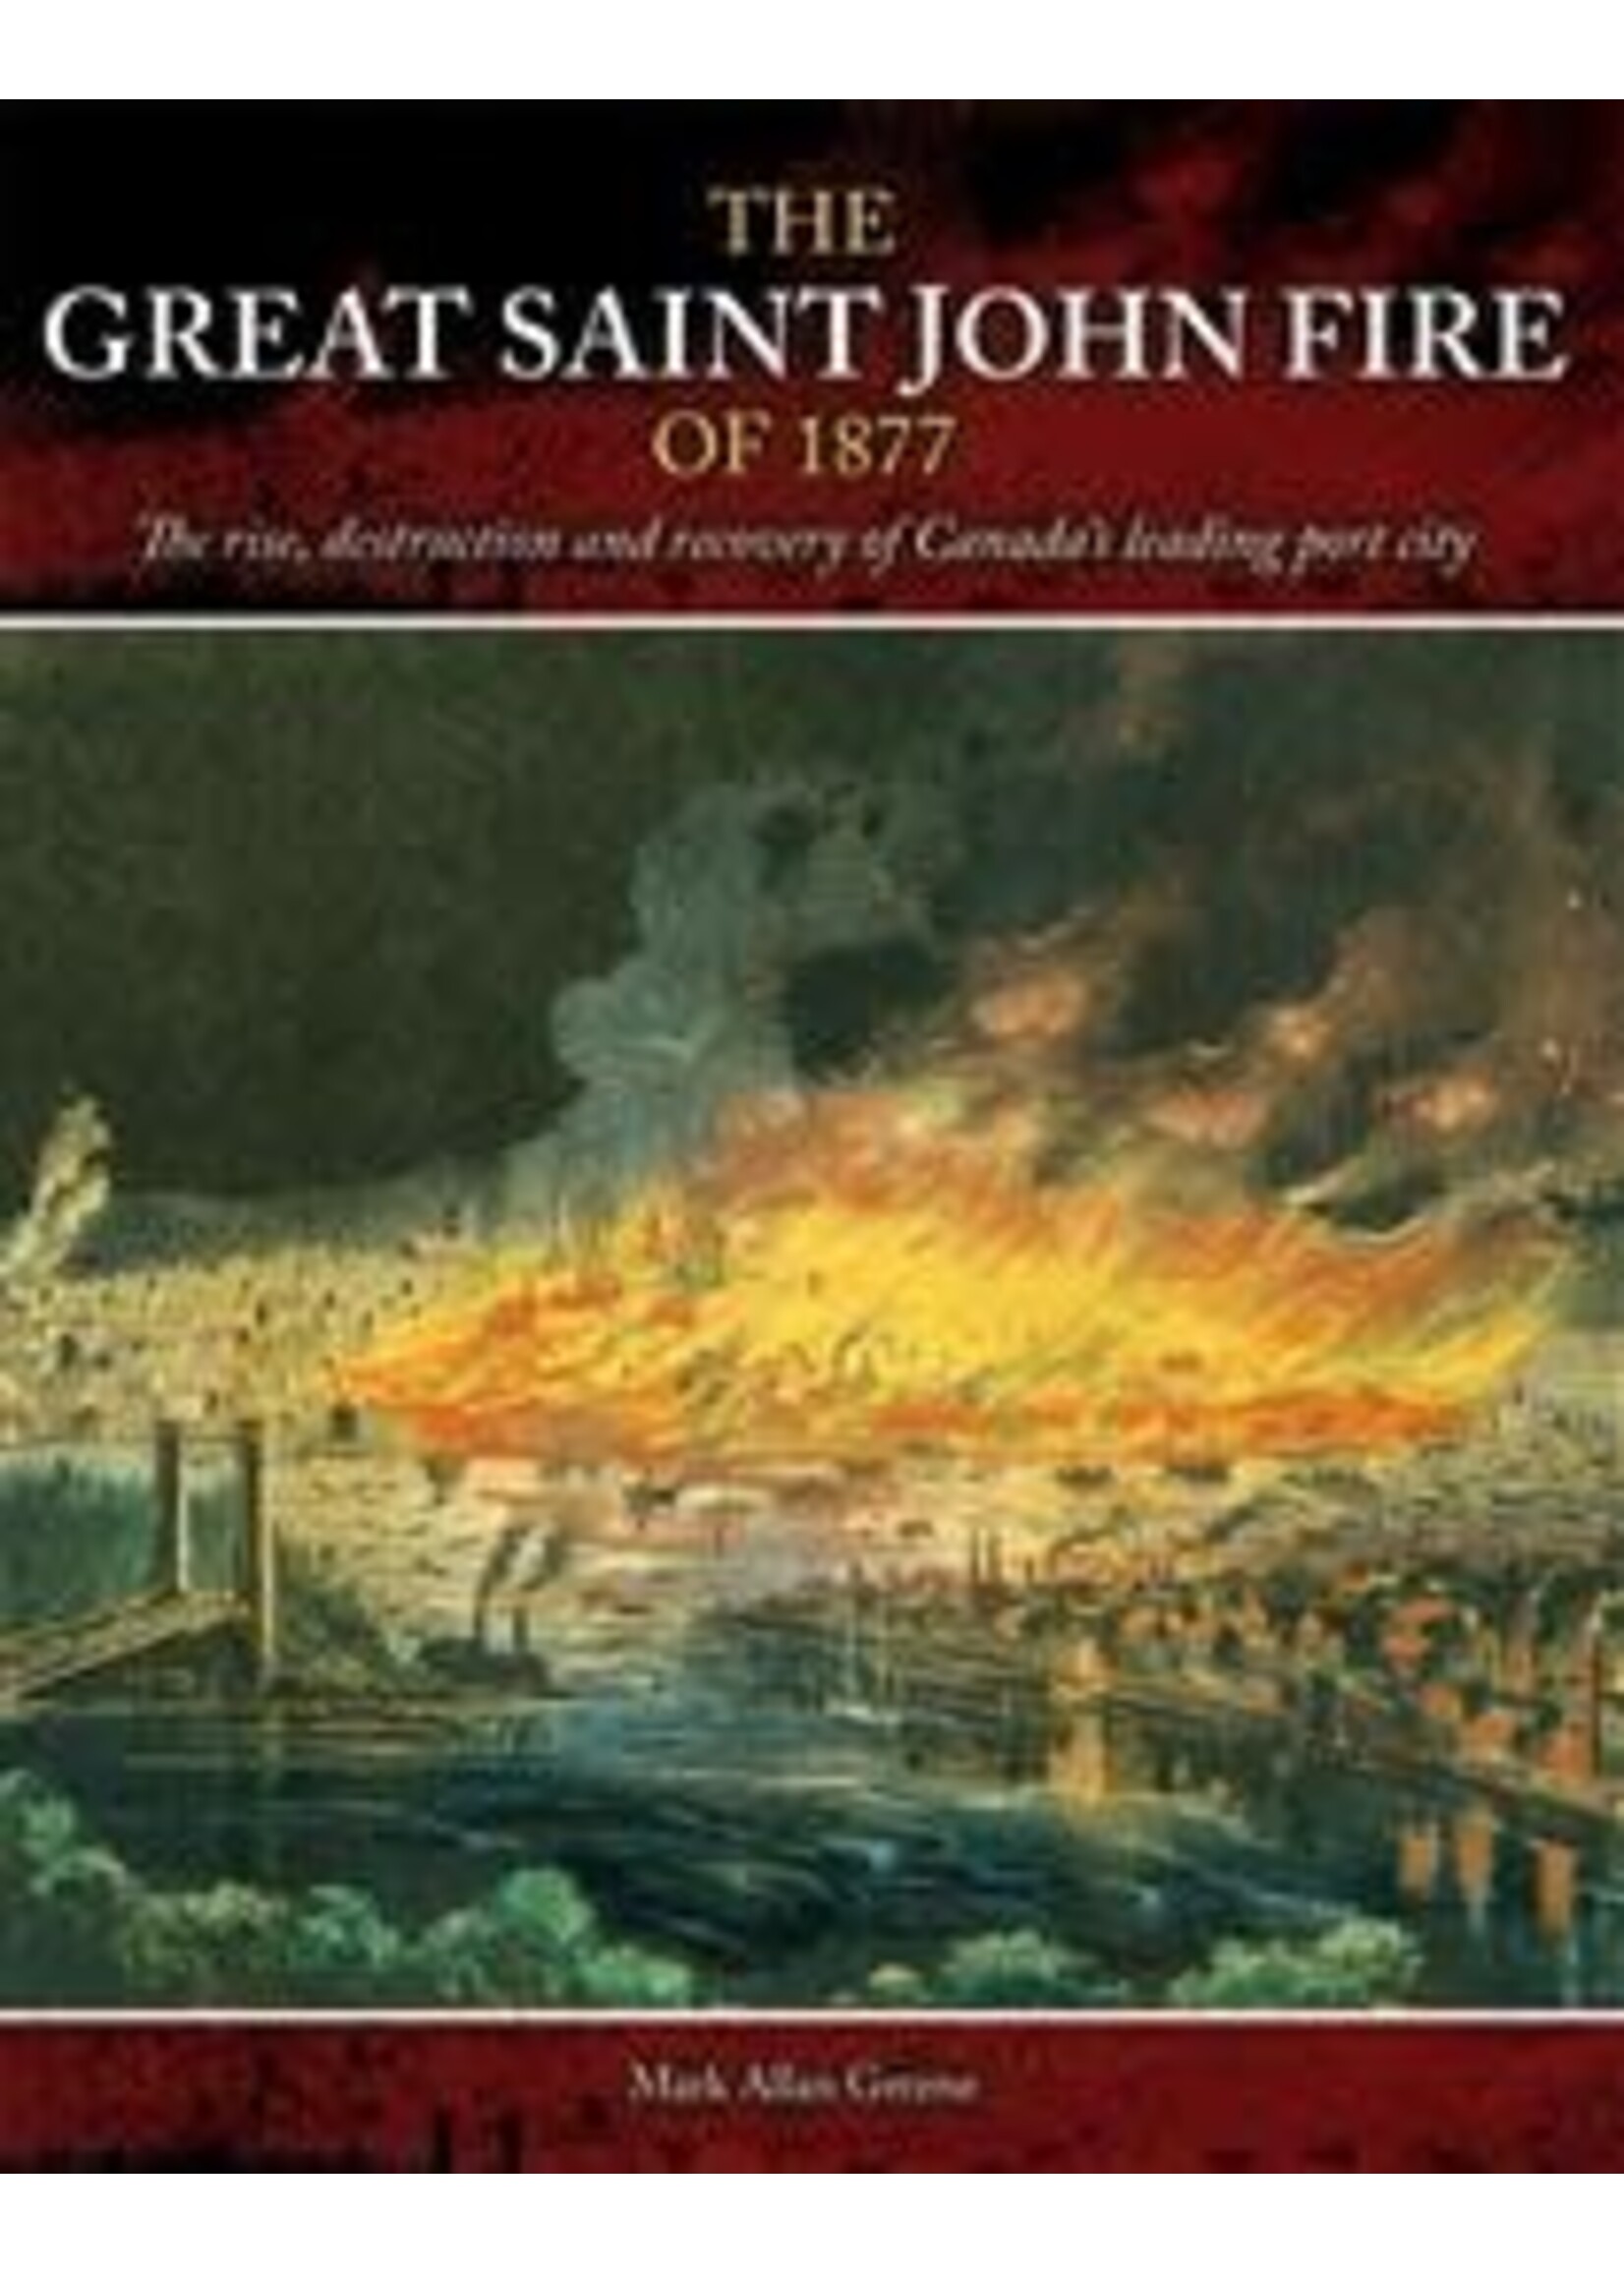 The Great Saint John Fire of 1877: The rise, destruction and recovery of Canada’s leading port city by Mark Allan Greene